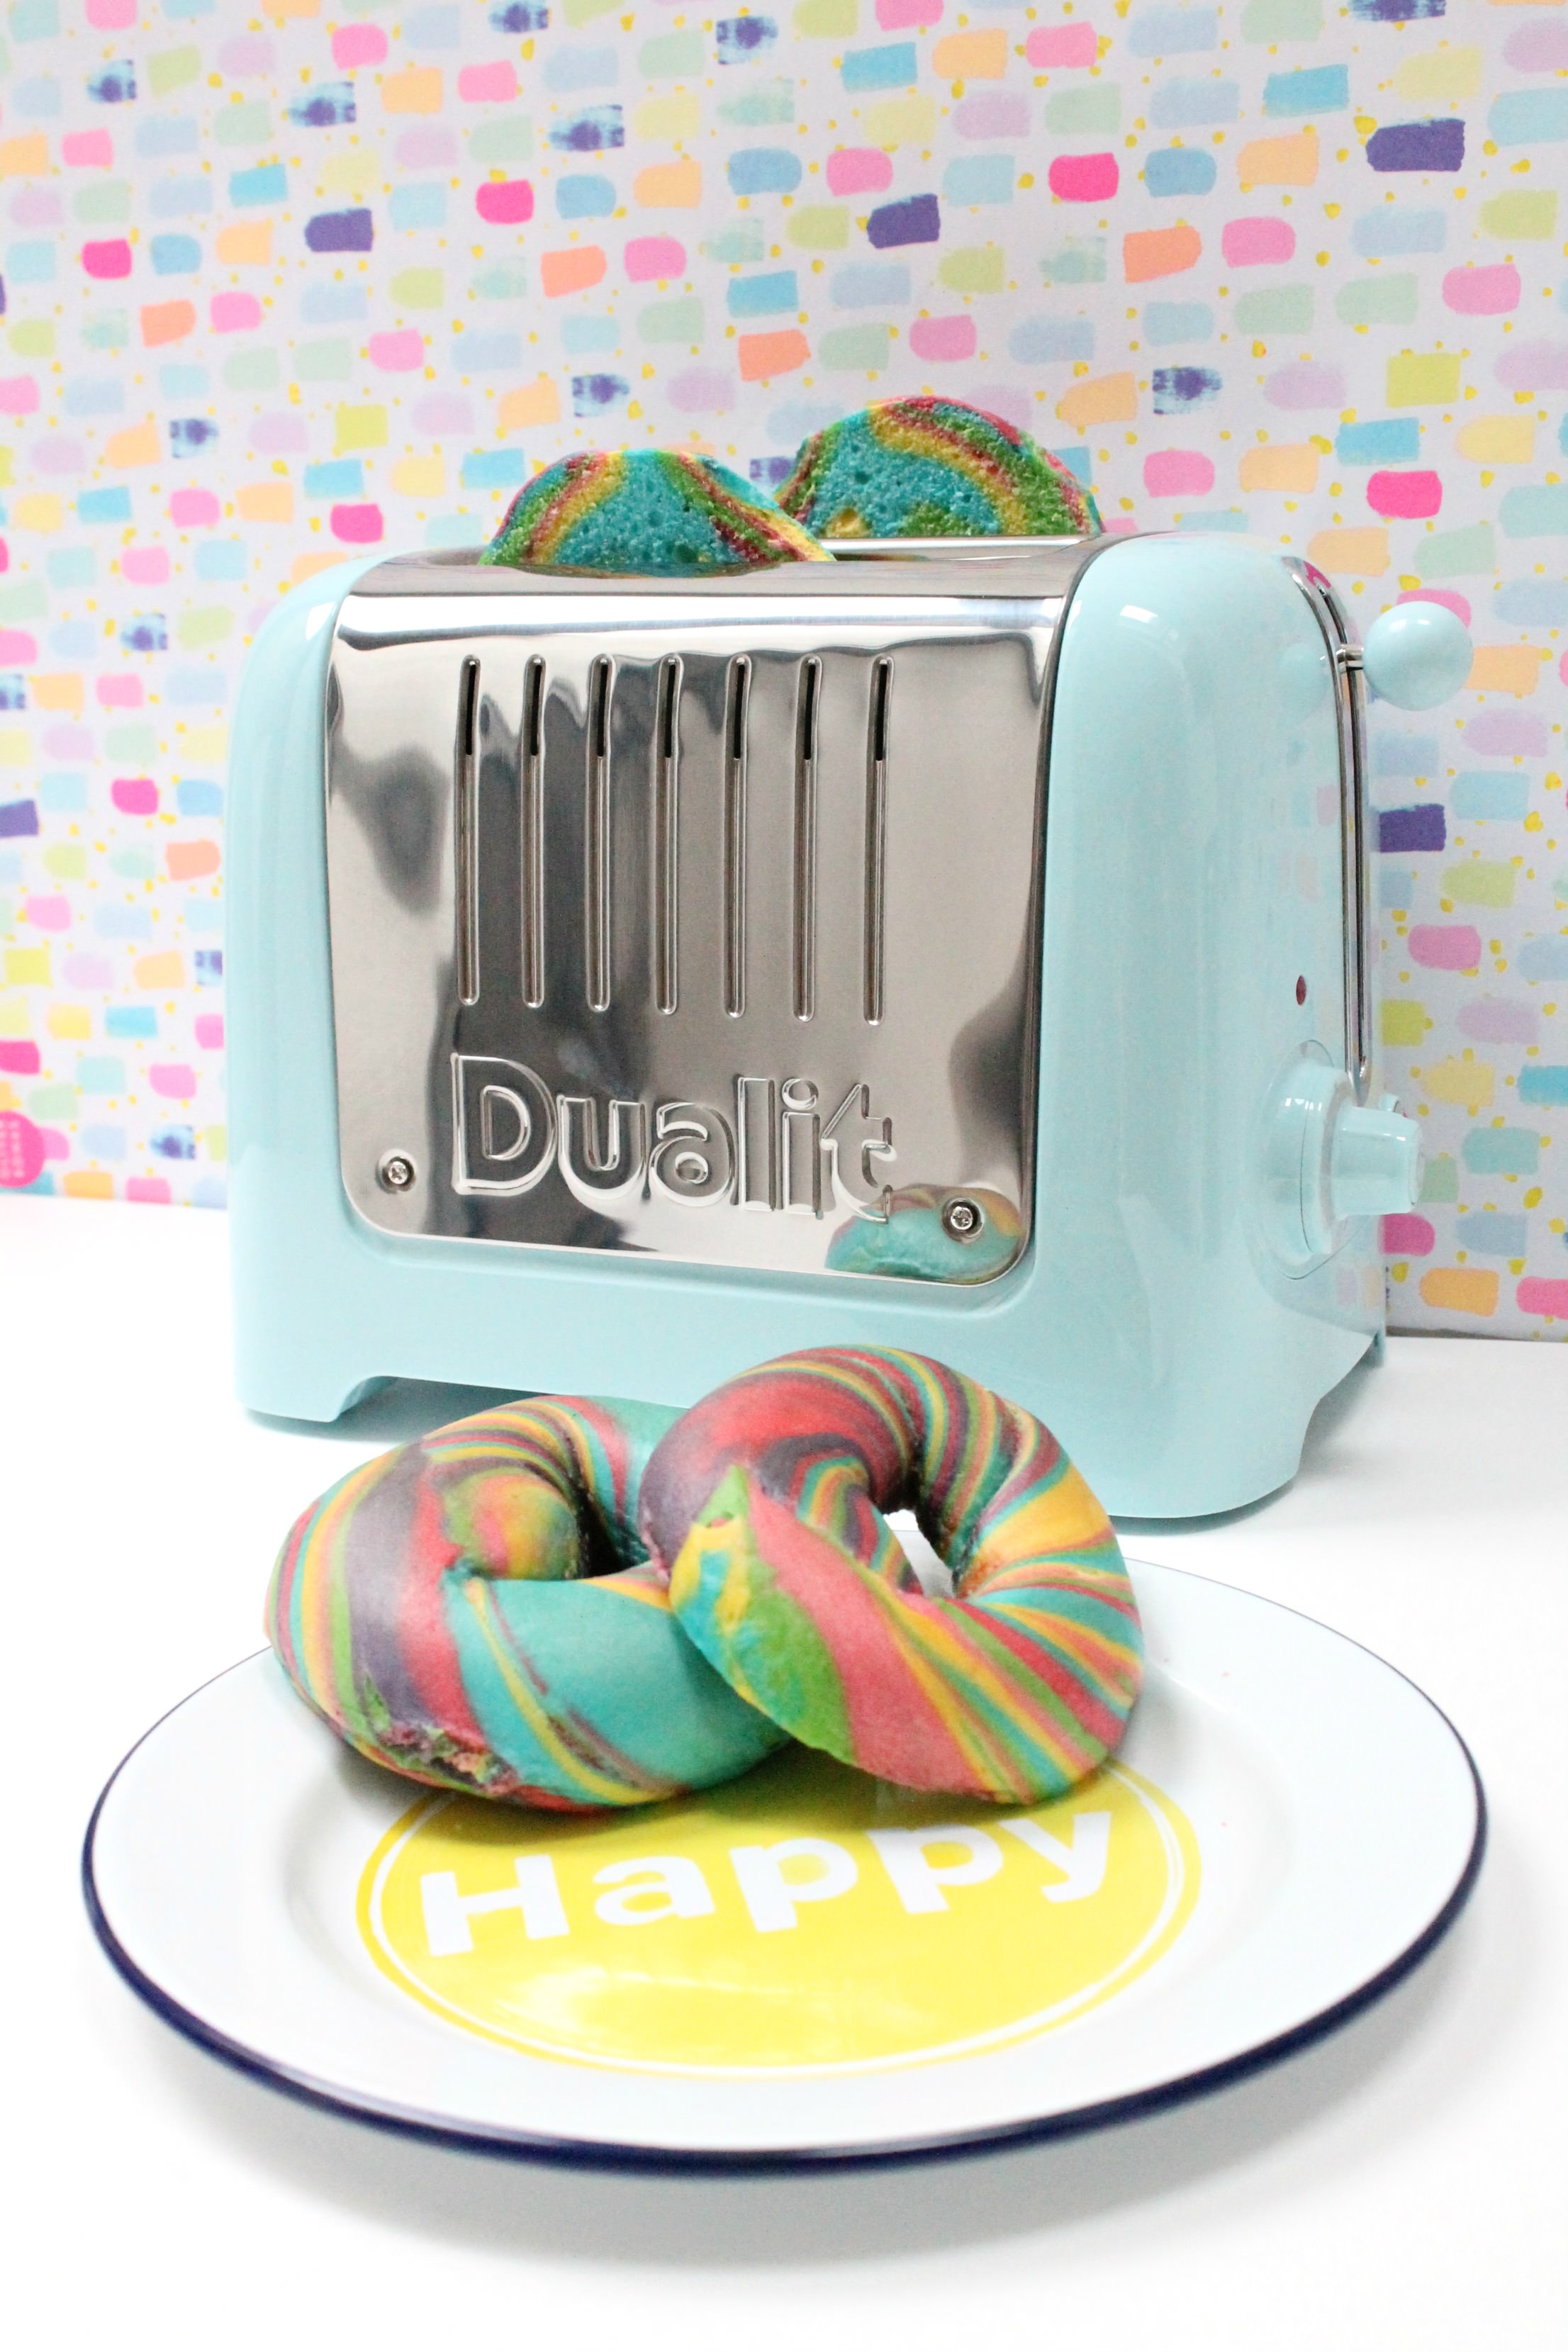 Dualit-lite-toaster-photo-by-Little-Big-Bell